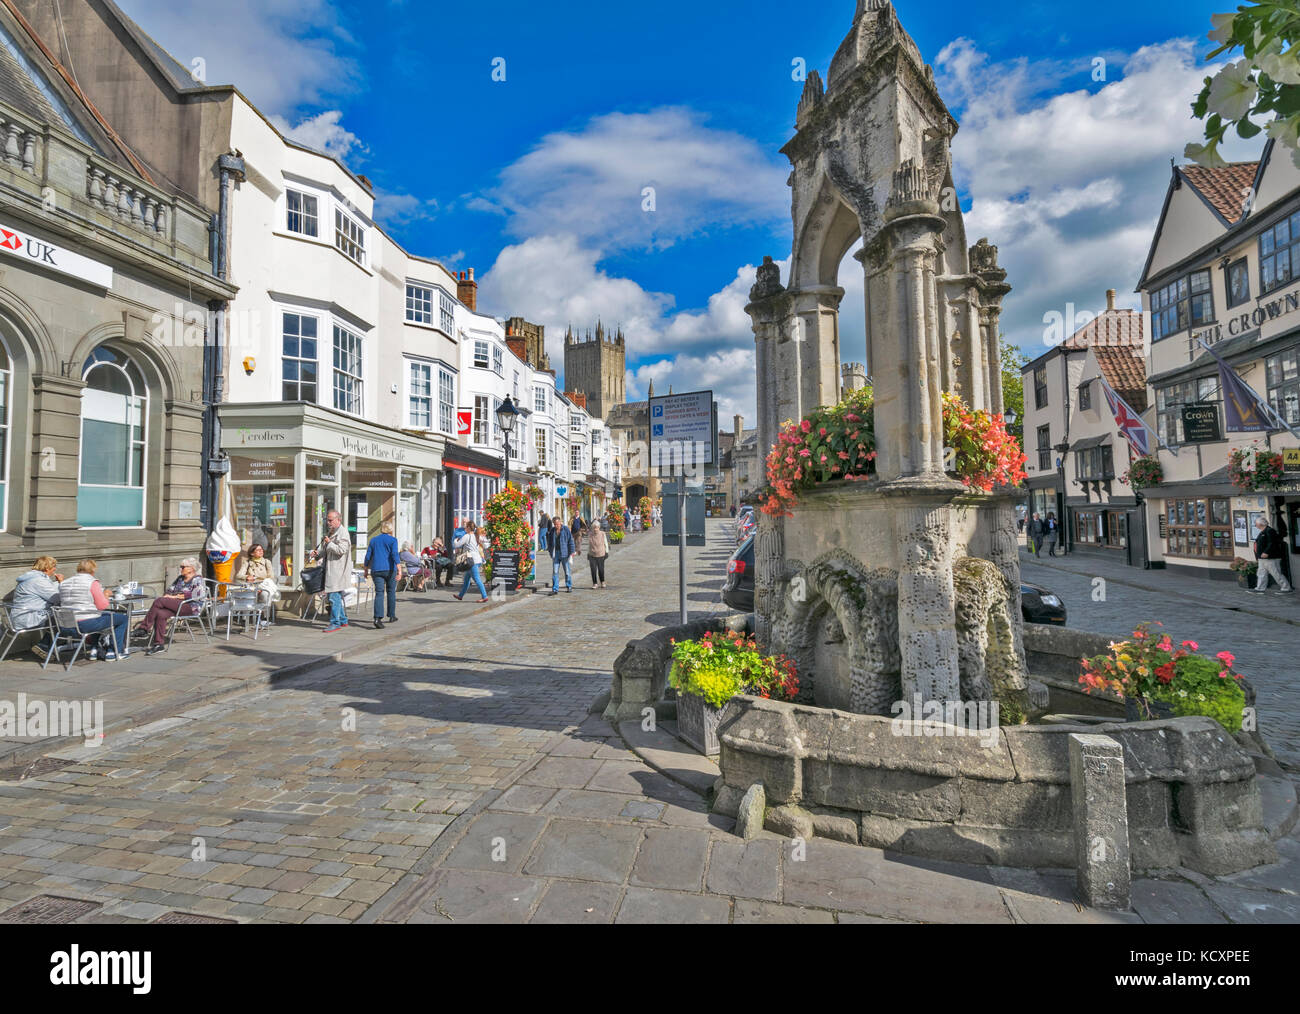 WELLS SOMERSET ENGLAND THE MAIN STREET LEADING TO THE CATHEDRAL AND ANCIENT FOUNTAIN WITH FLOWER DISPLAYS Stock Photo